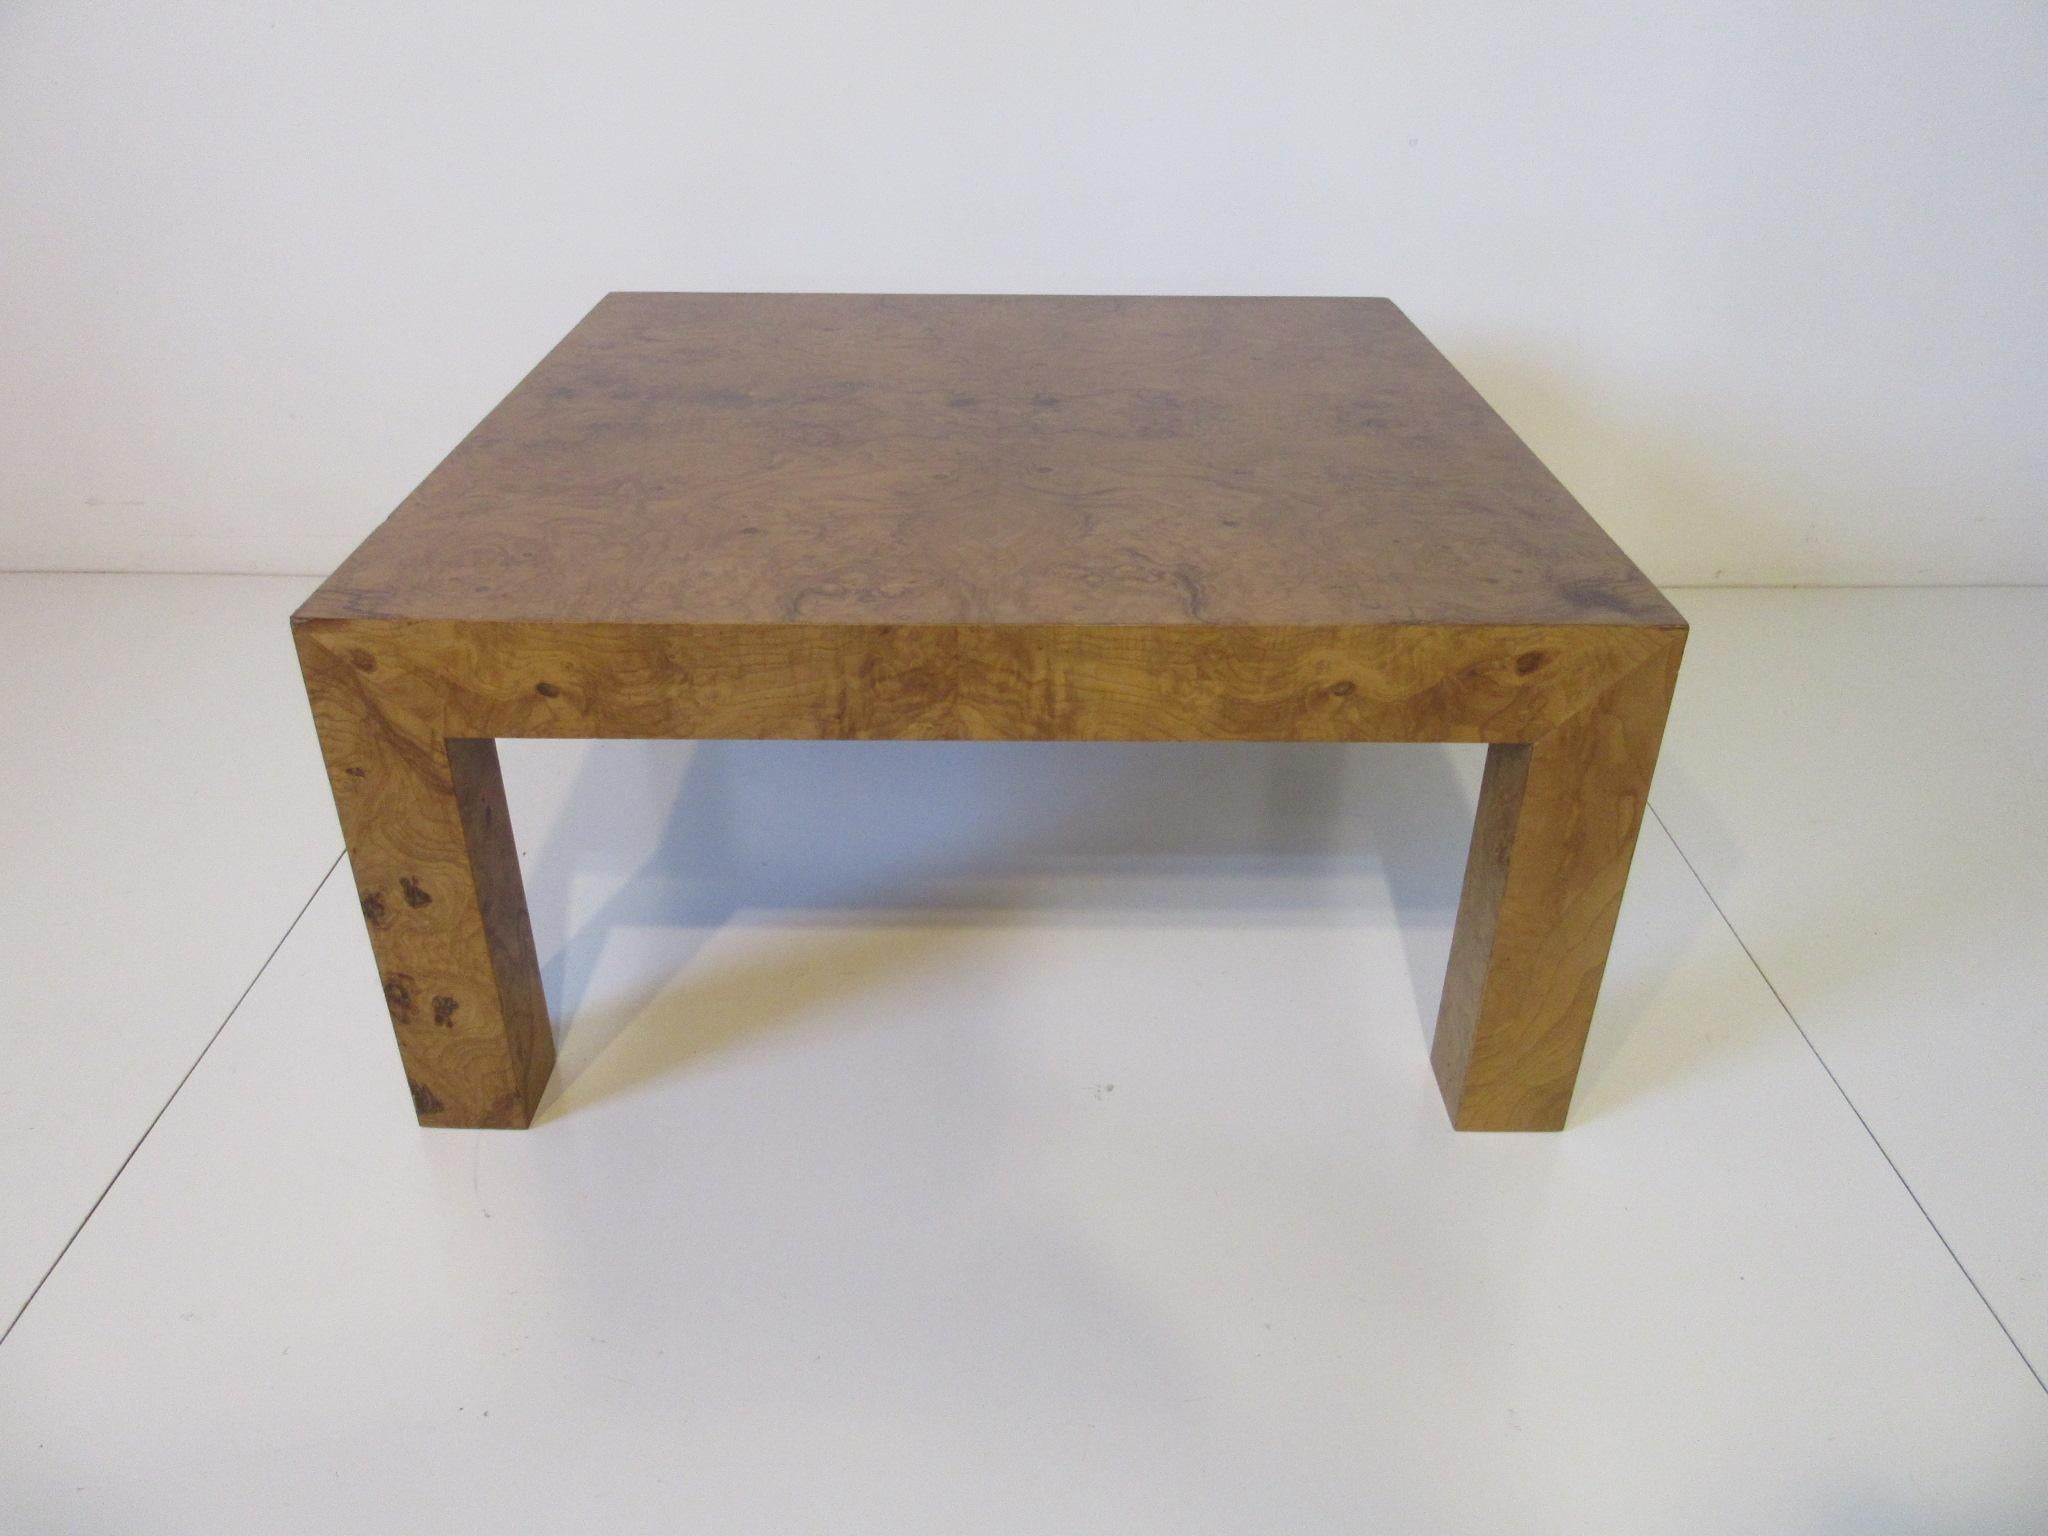 A smaller scale olive wood burl coffee table in the Parson design style, a simple and modern piece that will work with many decors, in the manner of Milo Baughman.